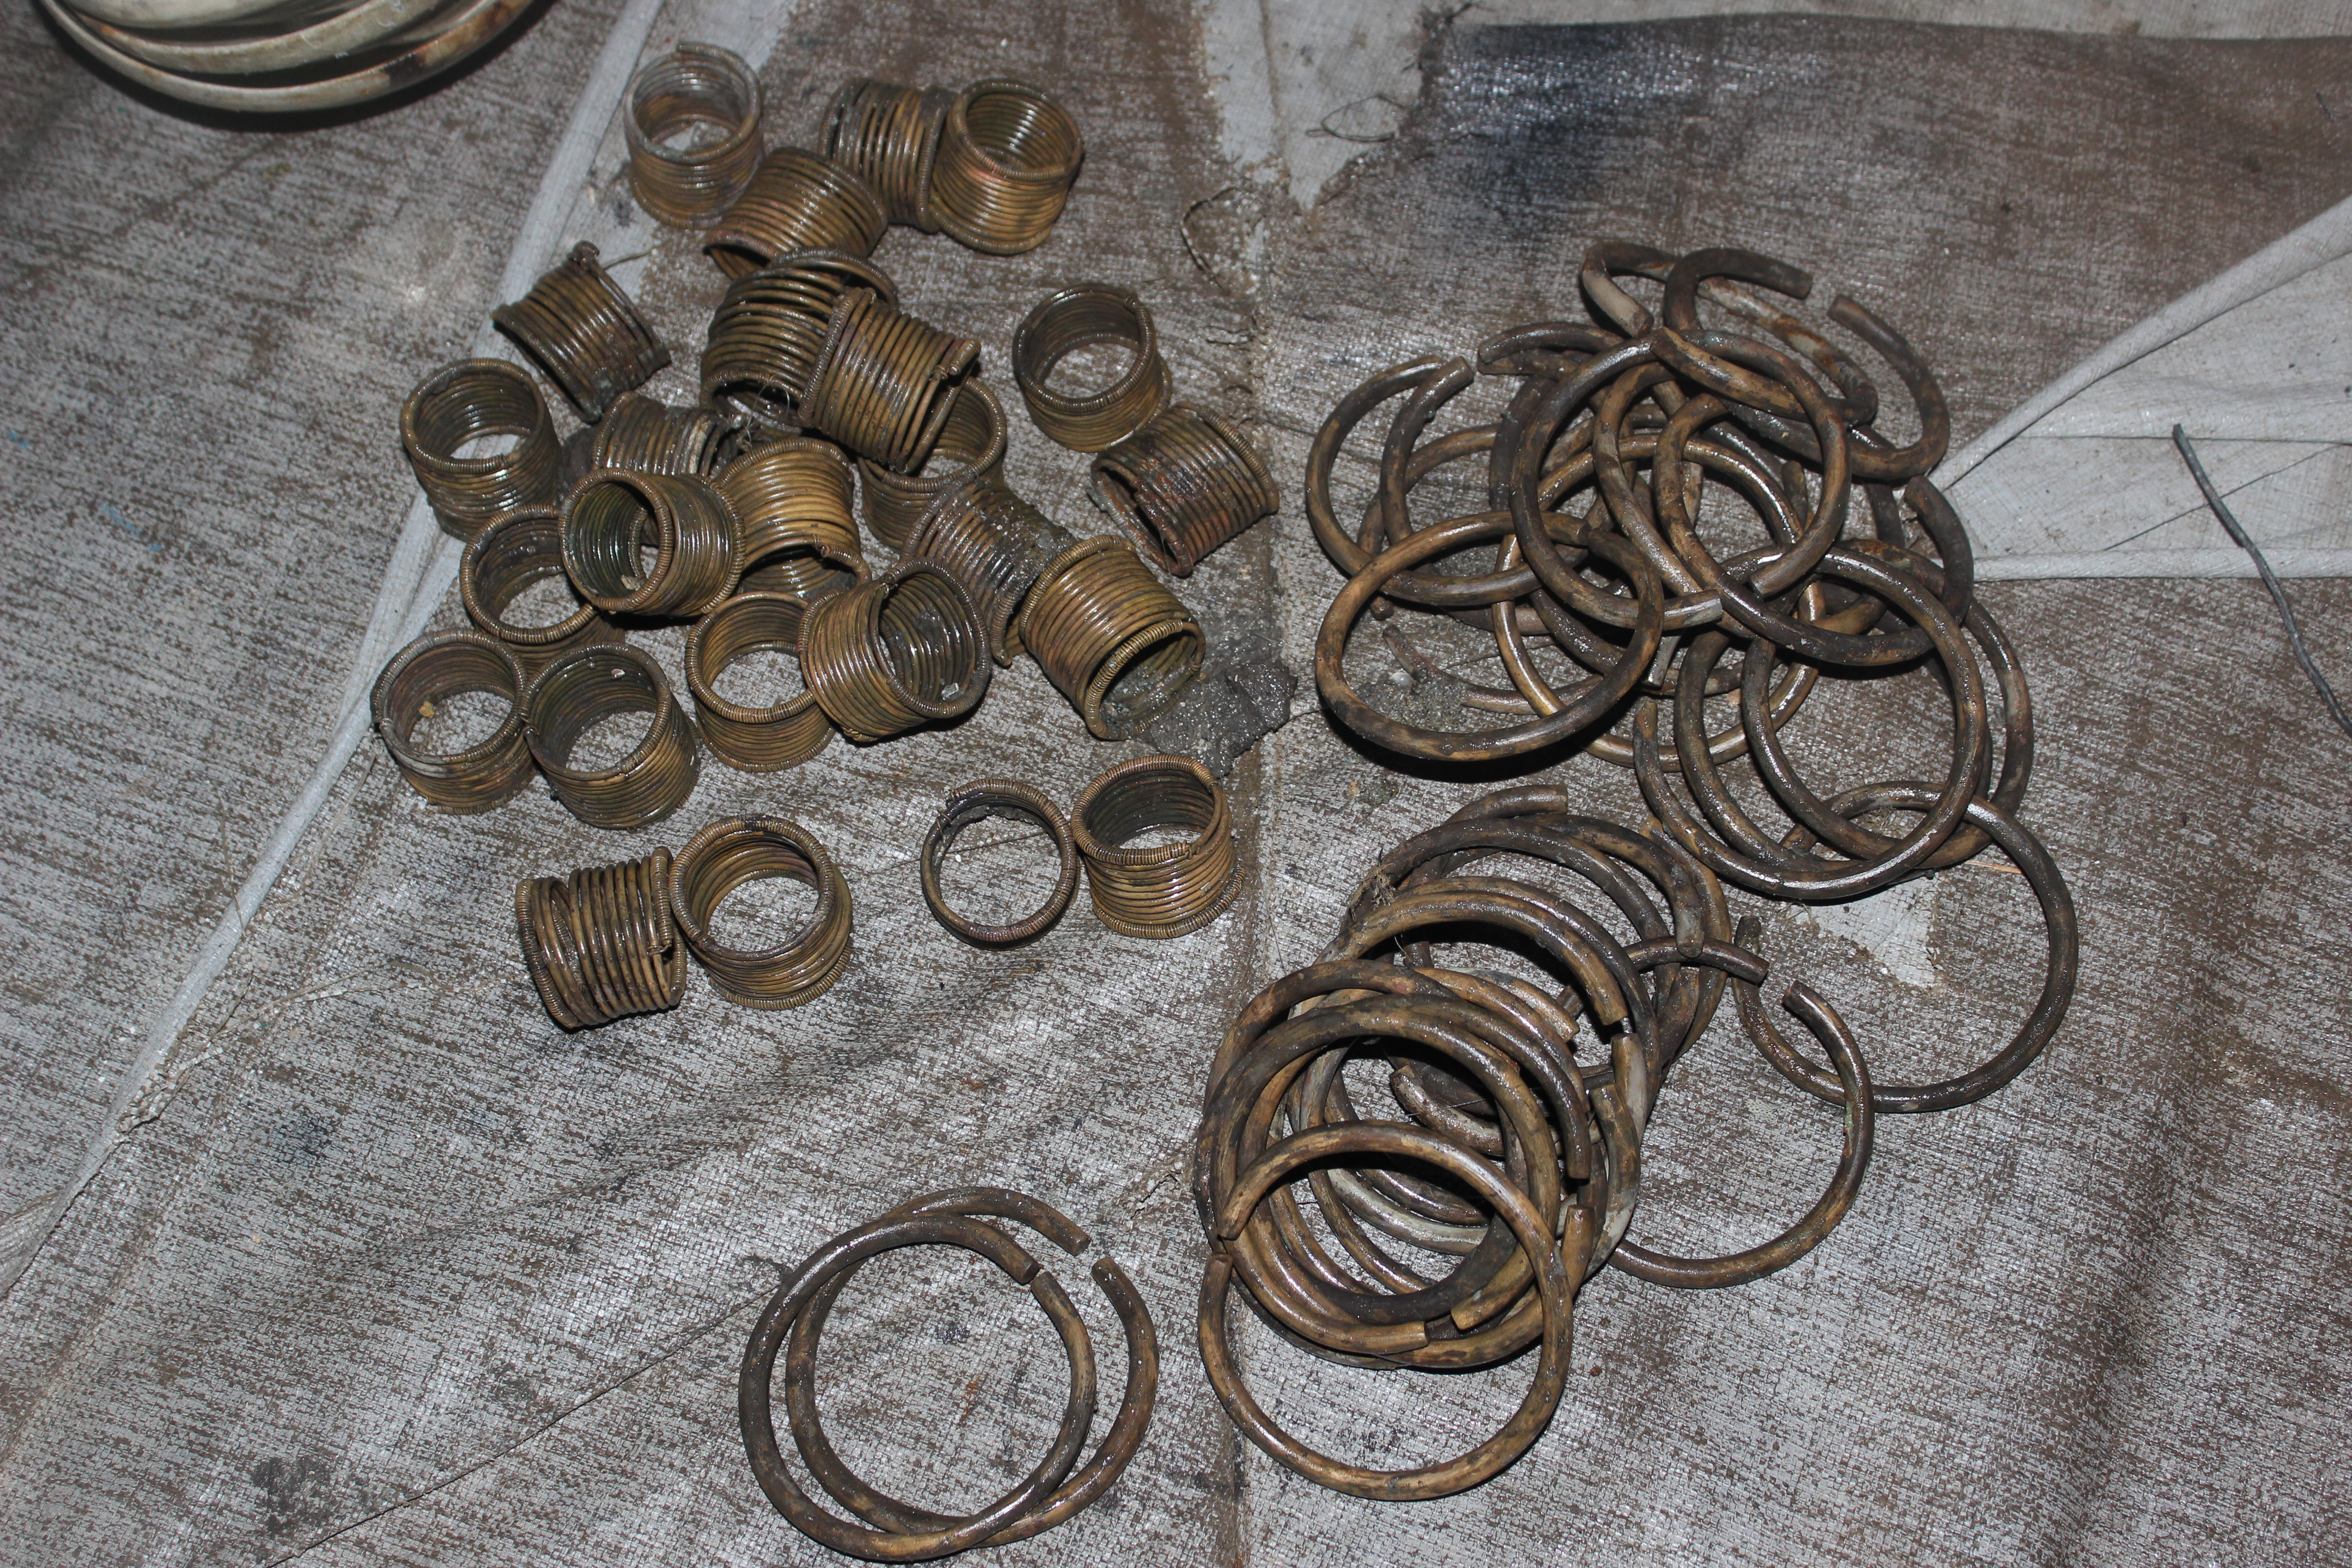 Piles of copper-alloy anklets and bracelets immediately after recovery.